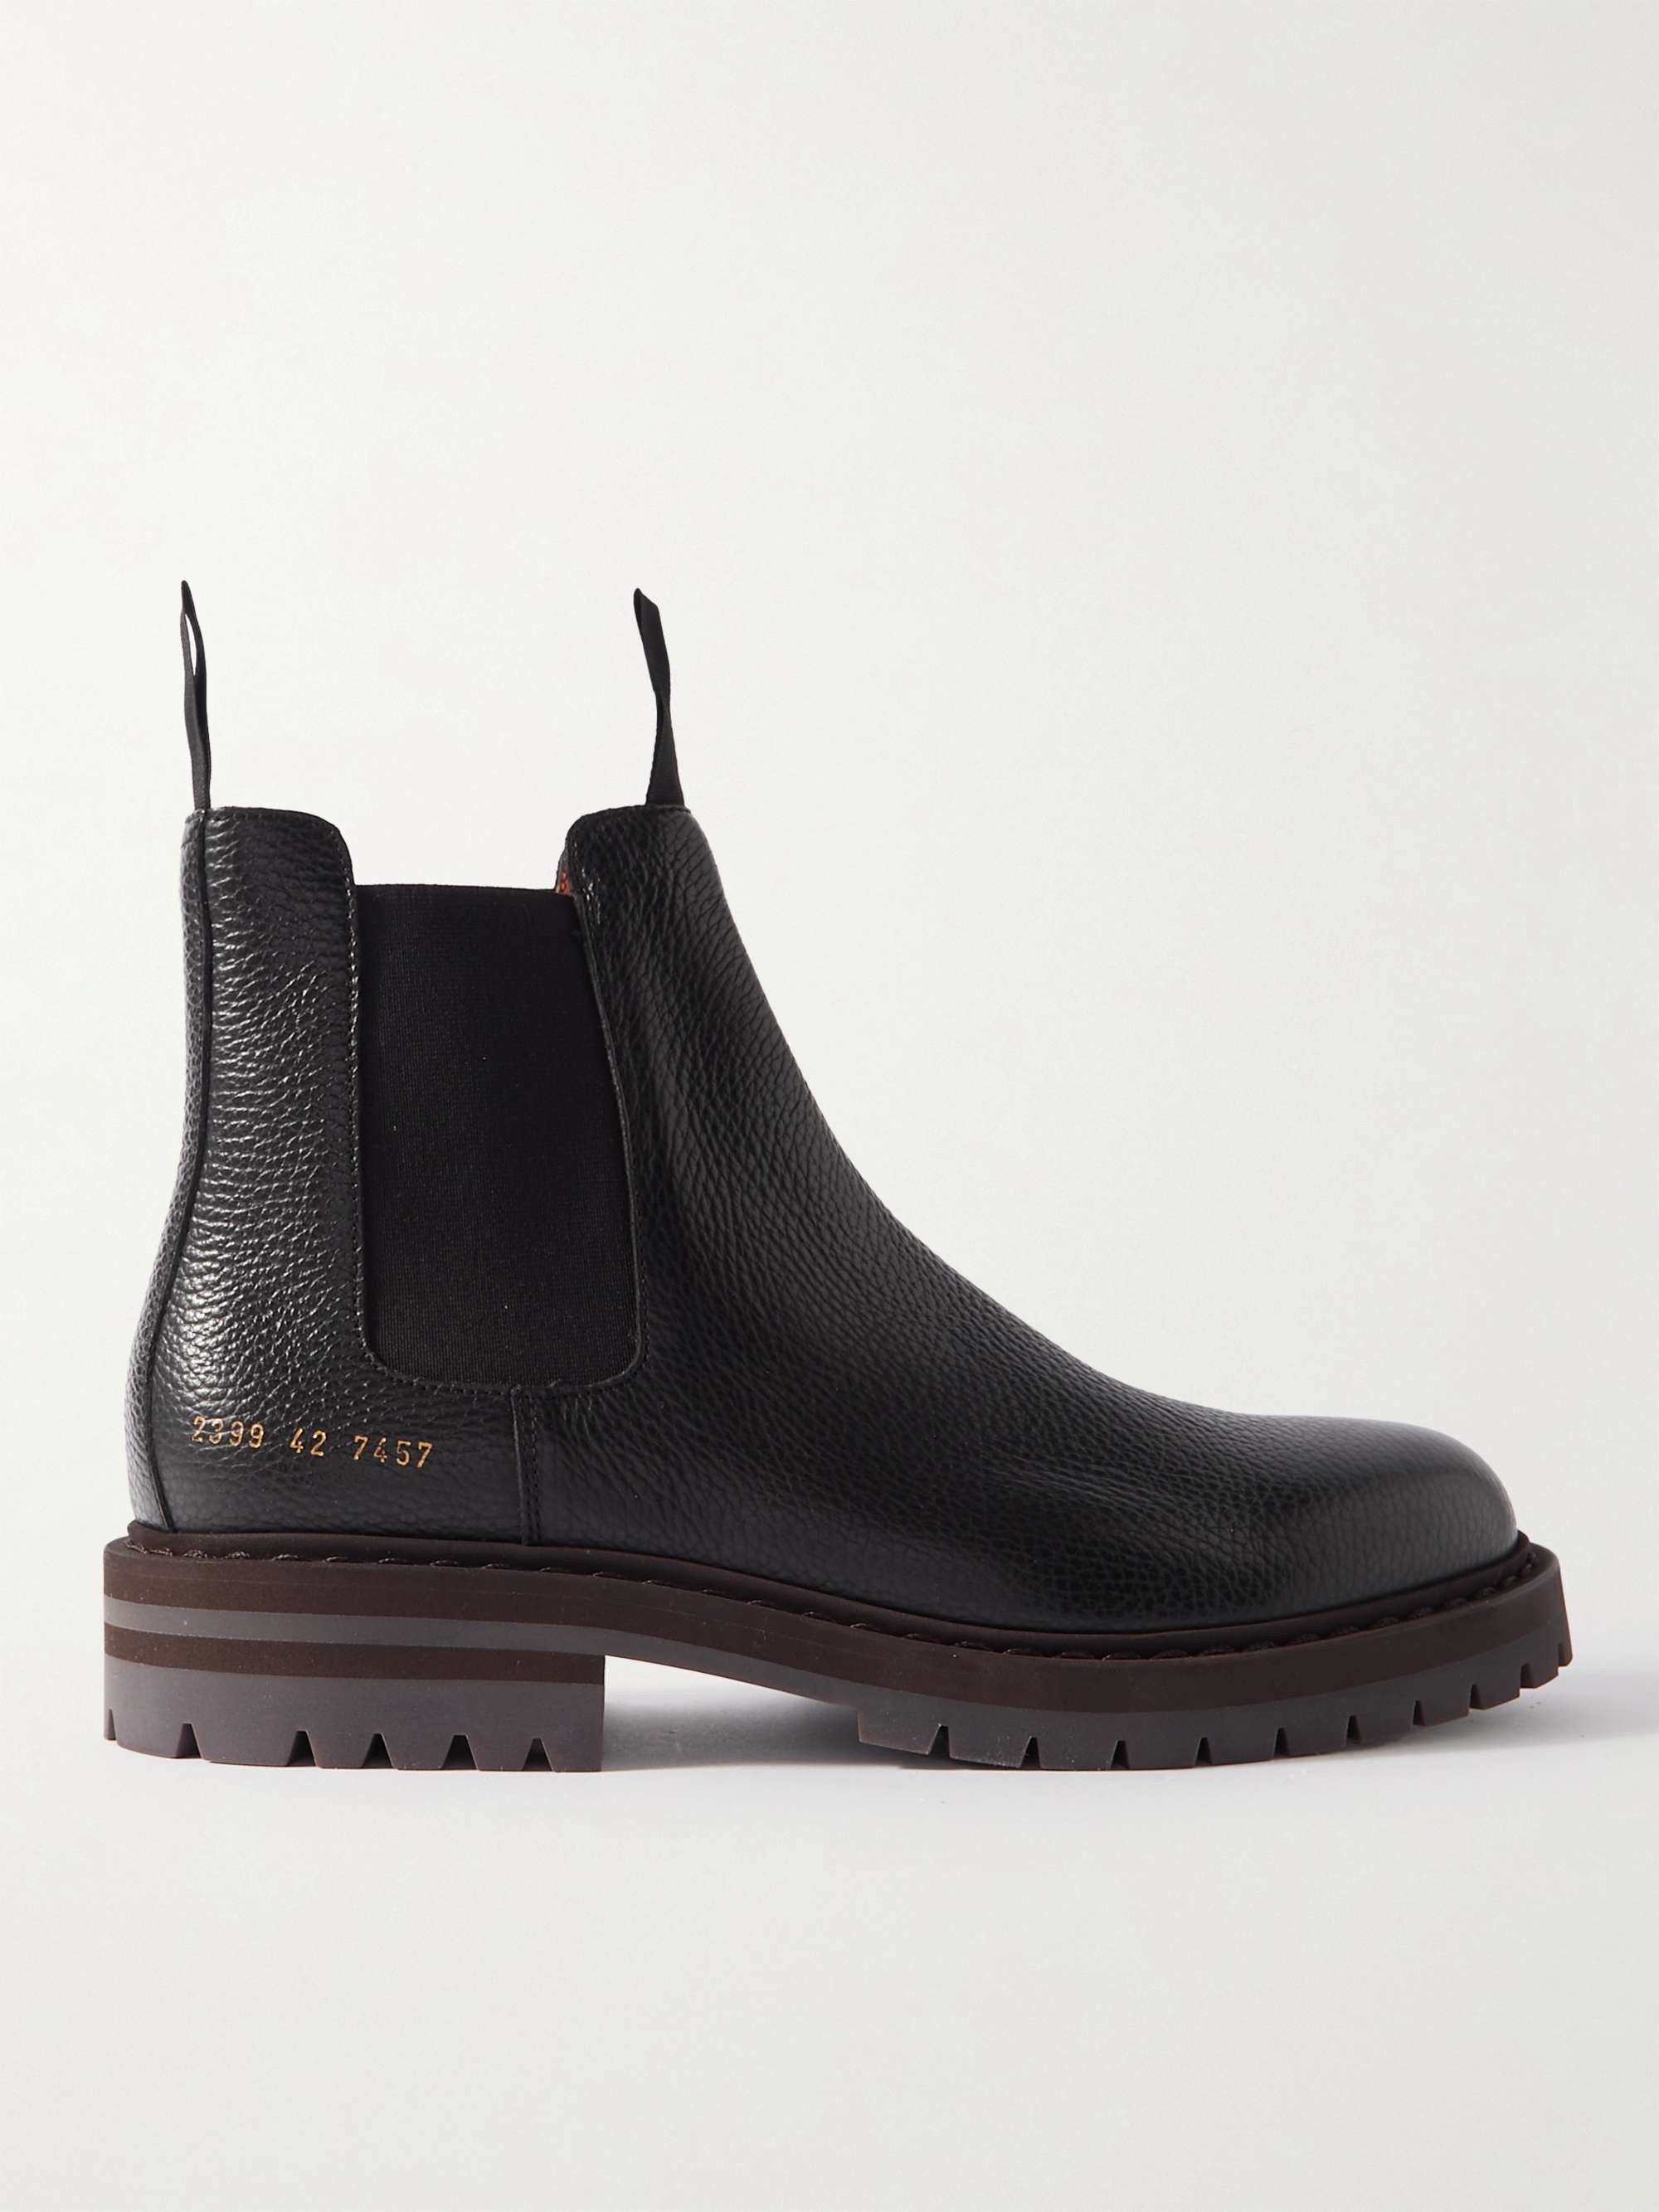 COMMON PROJECTS Full-Grain Leather Chelsea Boots for Men | MR PORTER